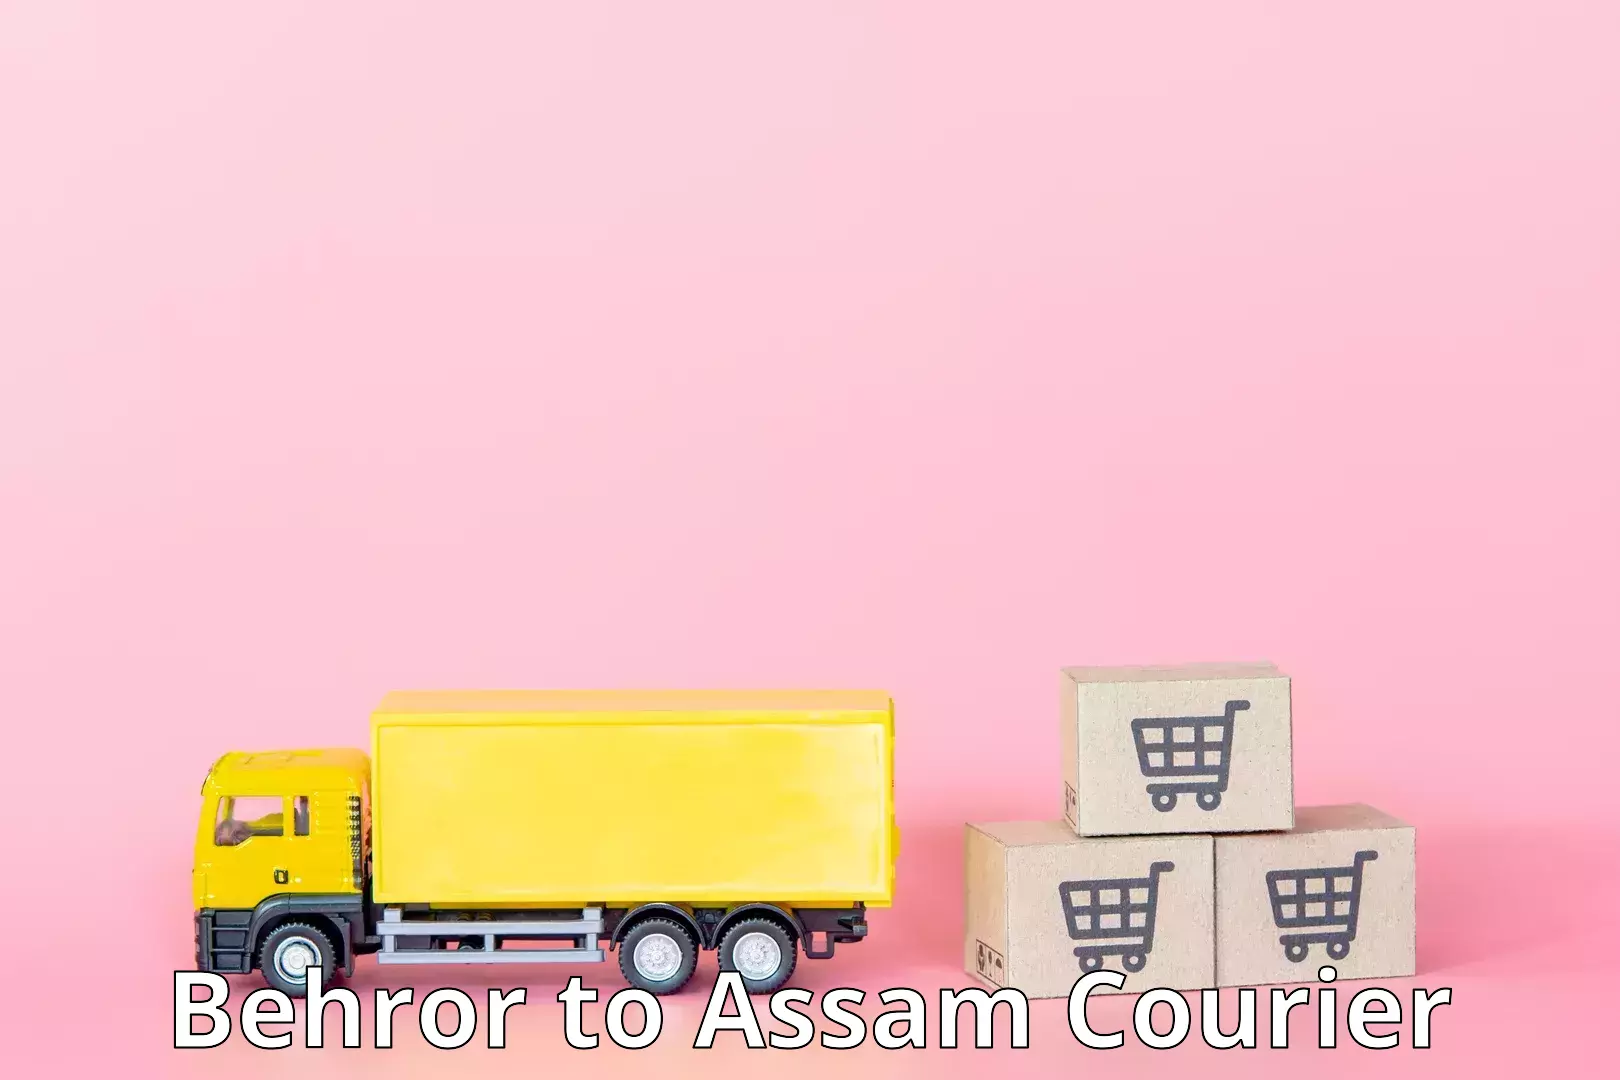 On-call courier service Behror to Assam